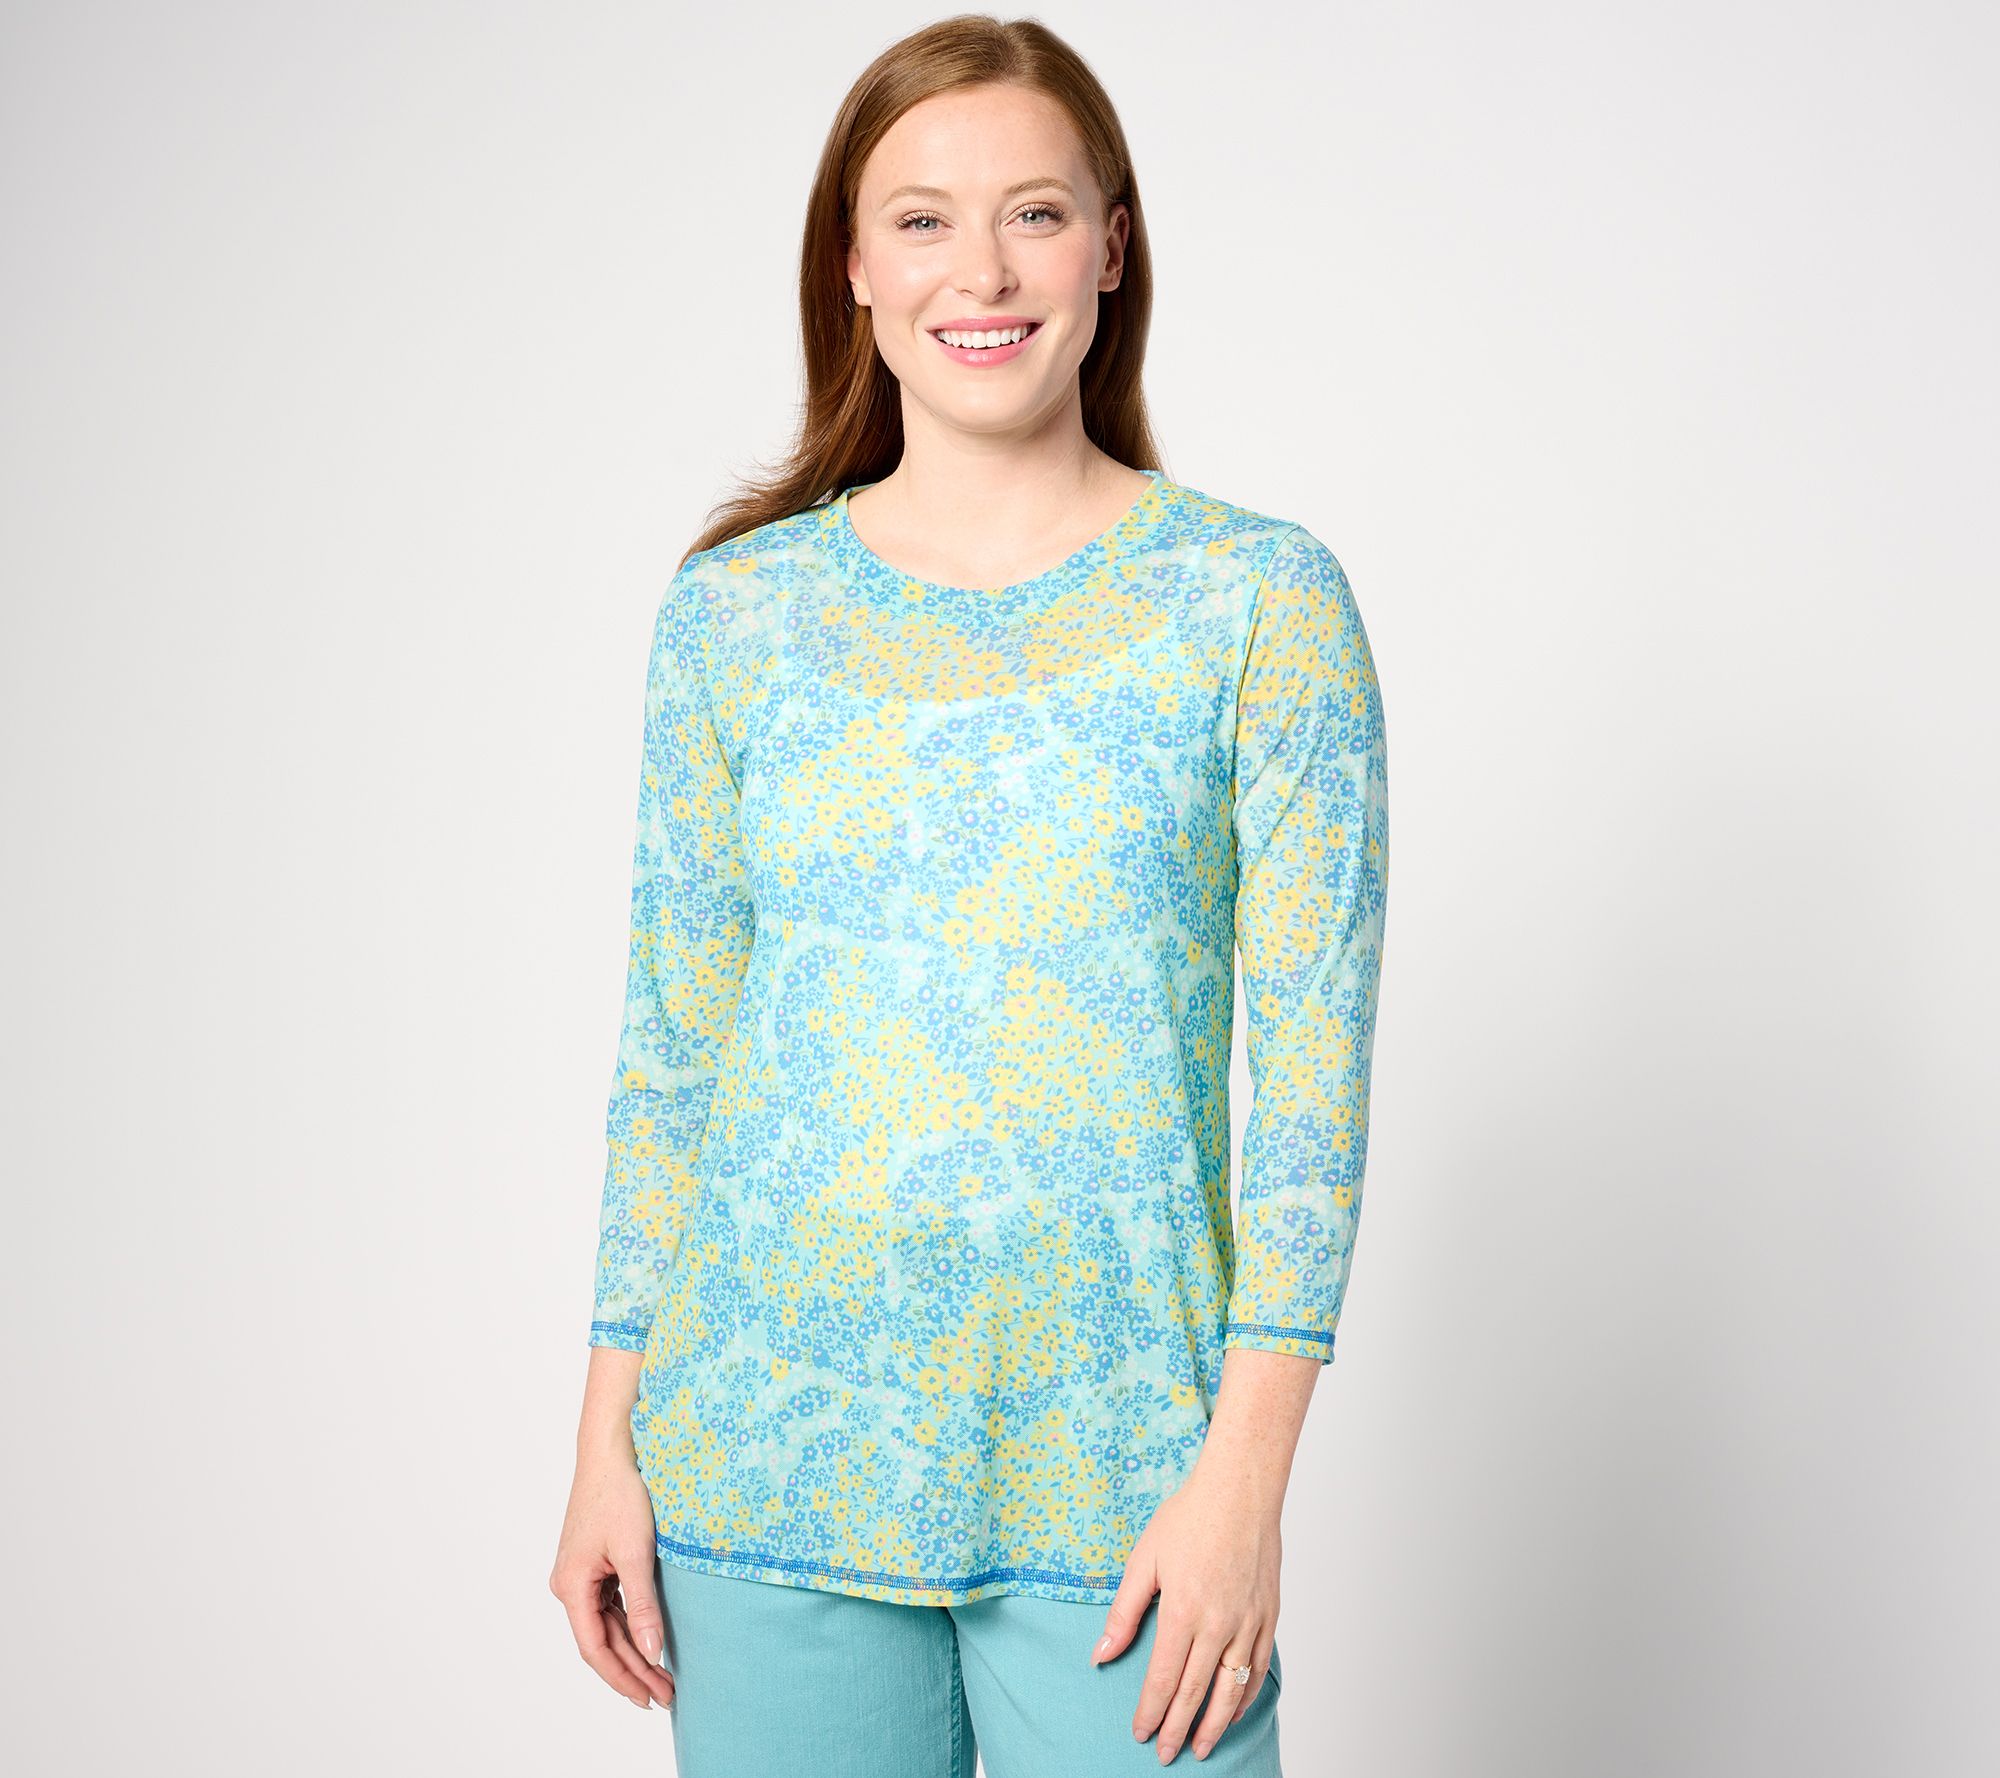 LOGO Layers by Lori Goldstein Floral Mesh 3/4 Sleeve Top 